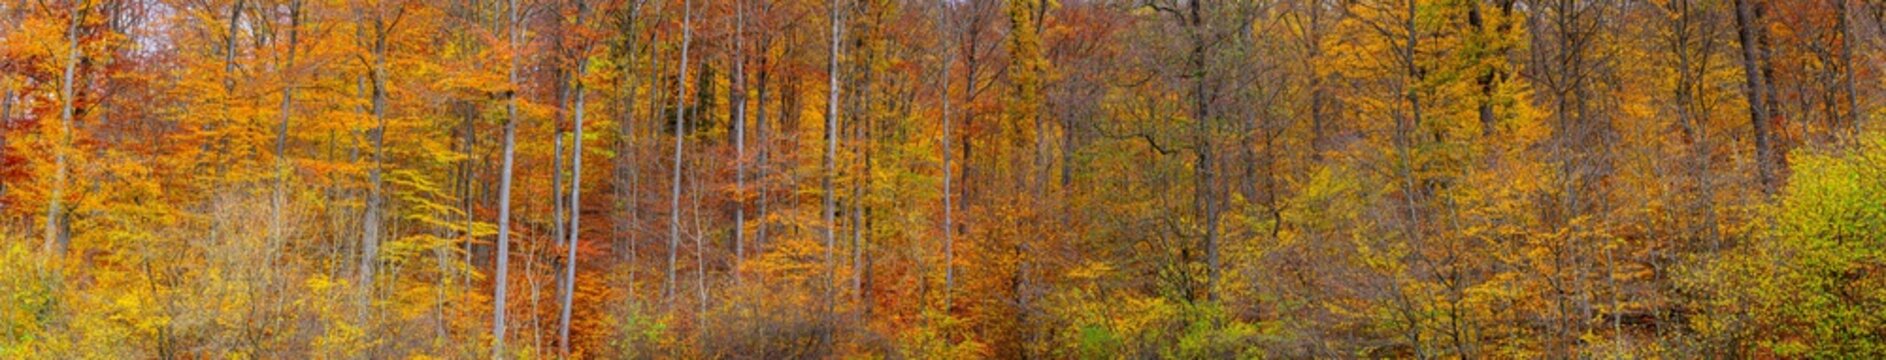 Extra wide autumn forest panorama with pleasant warm colors